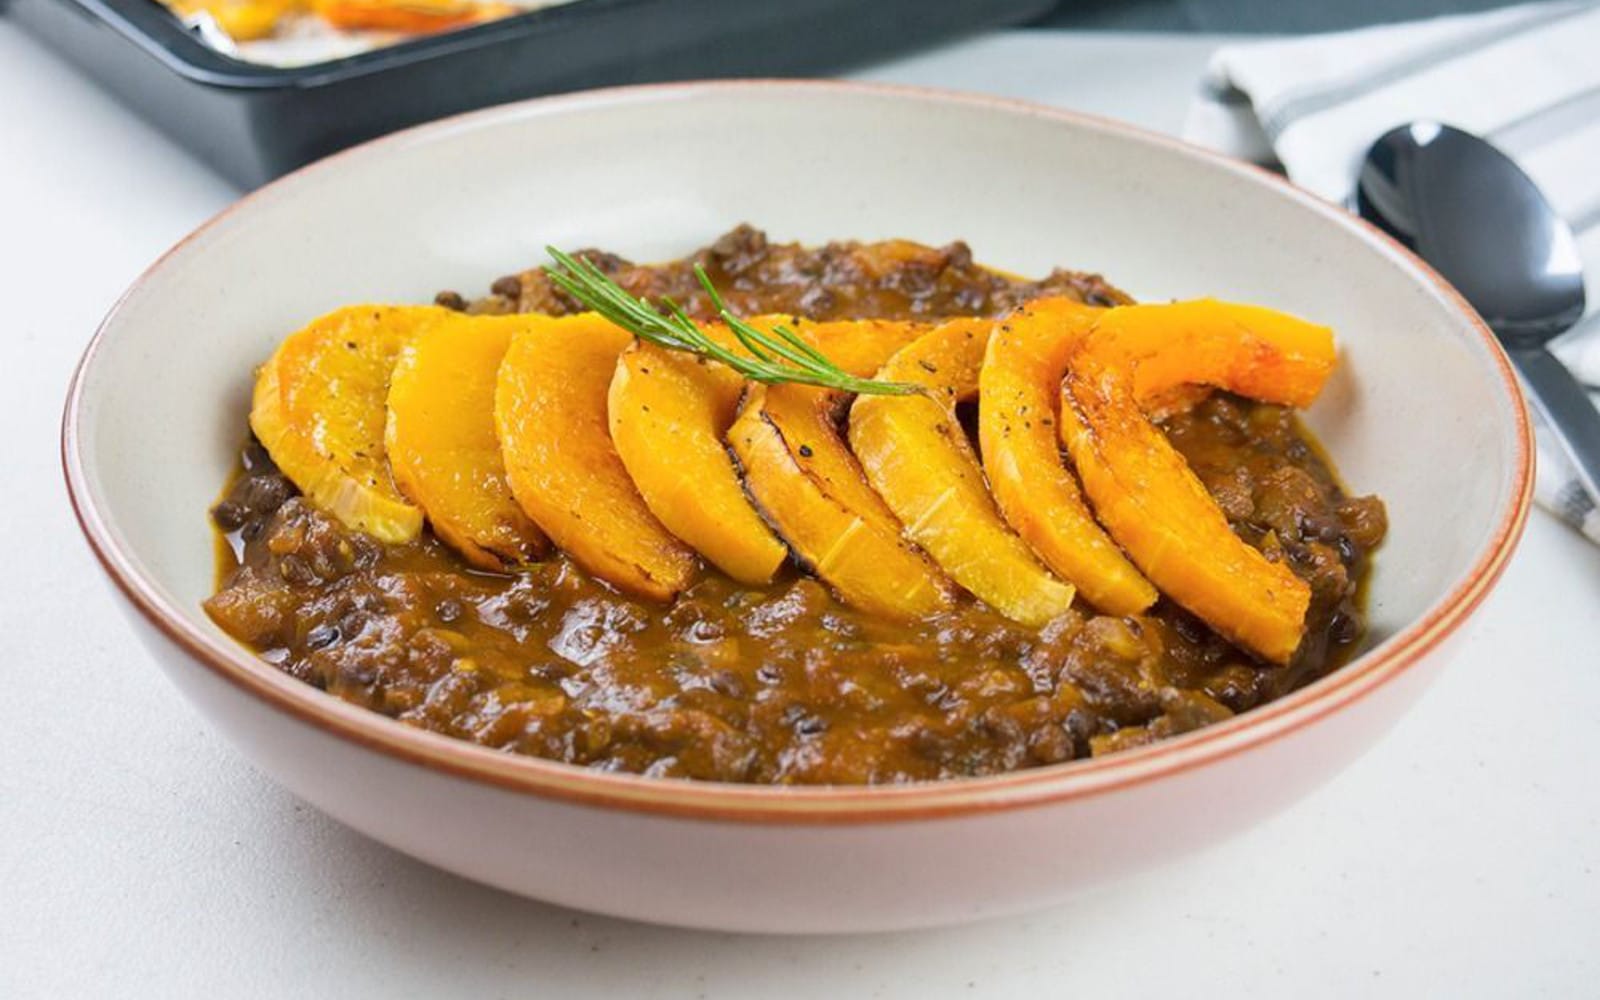 Rosemary Roasted Butternut Squash With Lentil, Tomato, and Mushroom Sauce